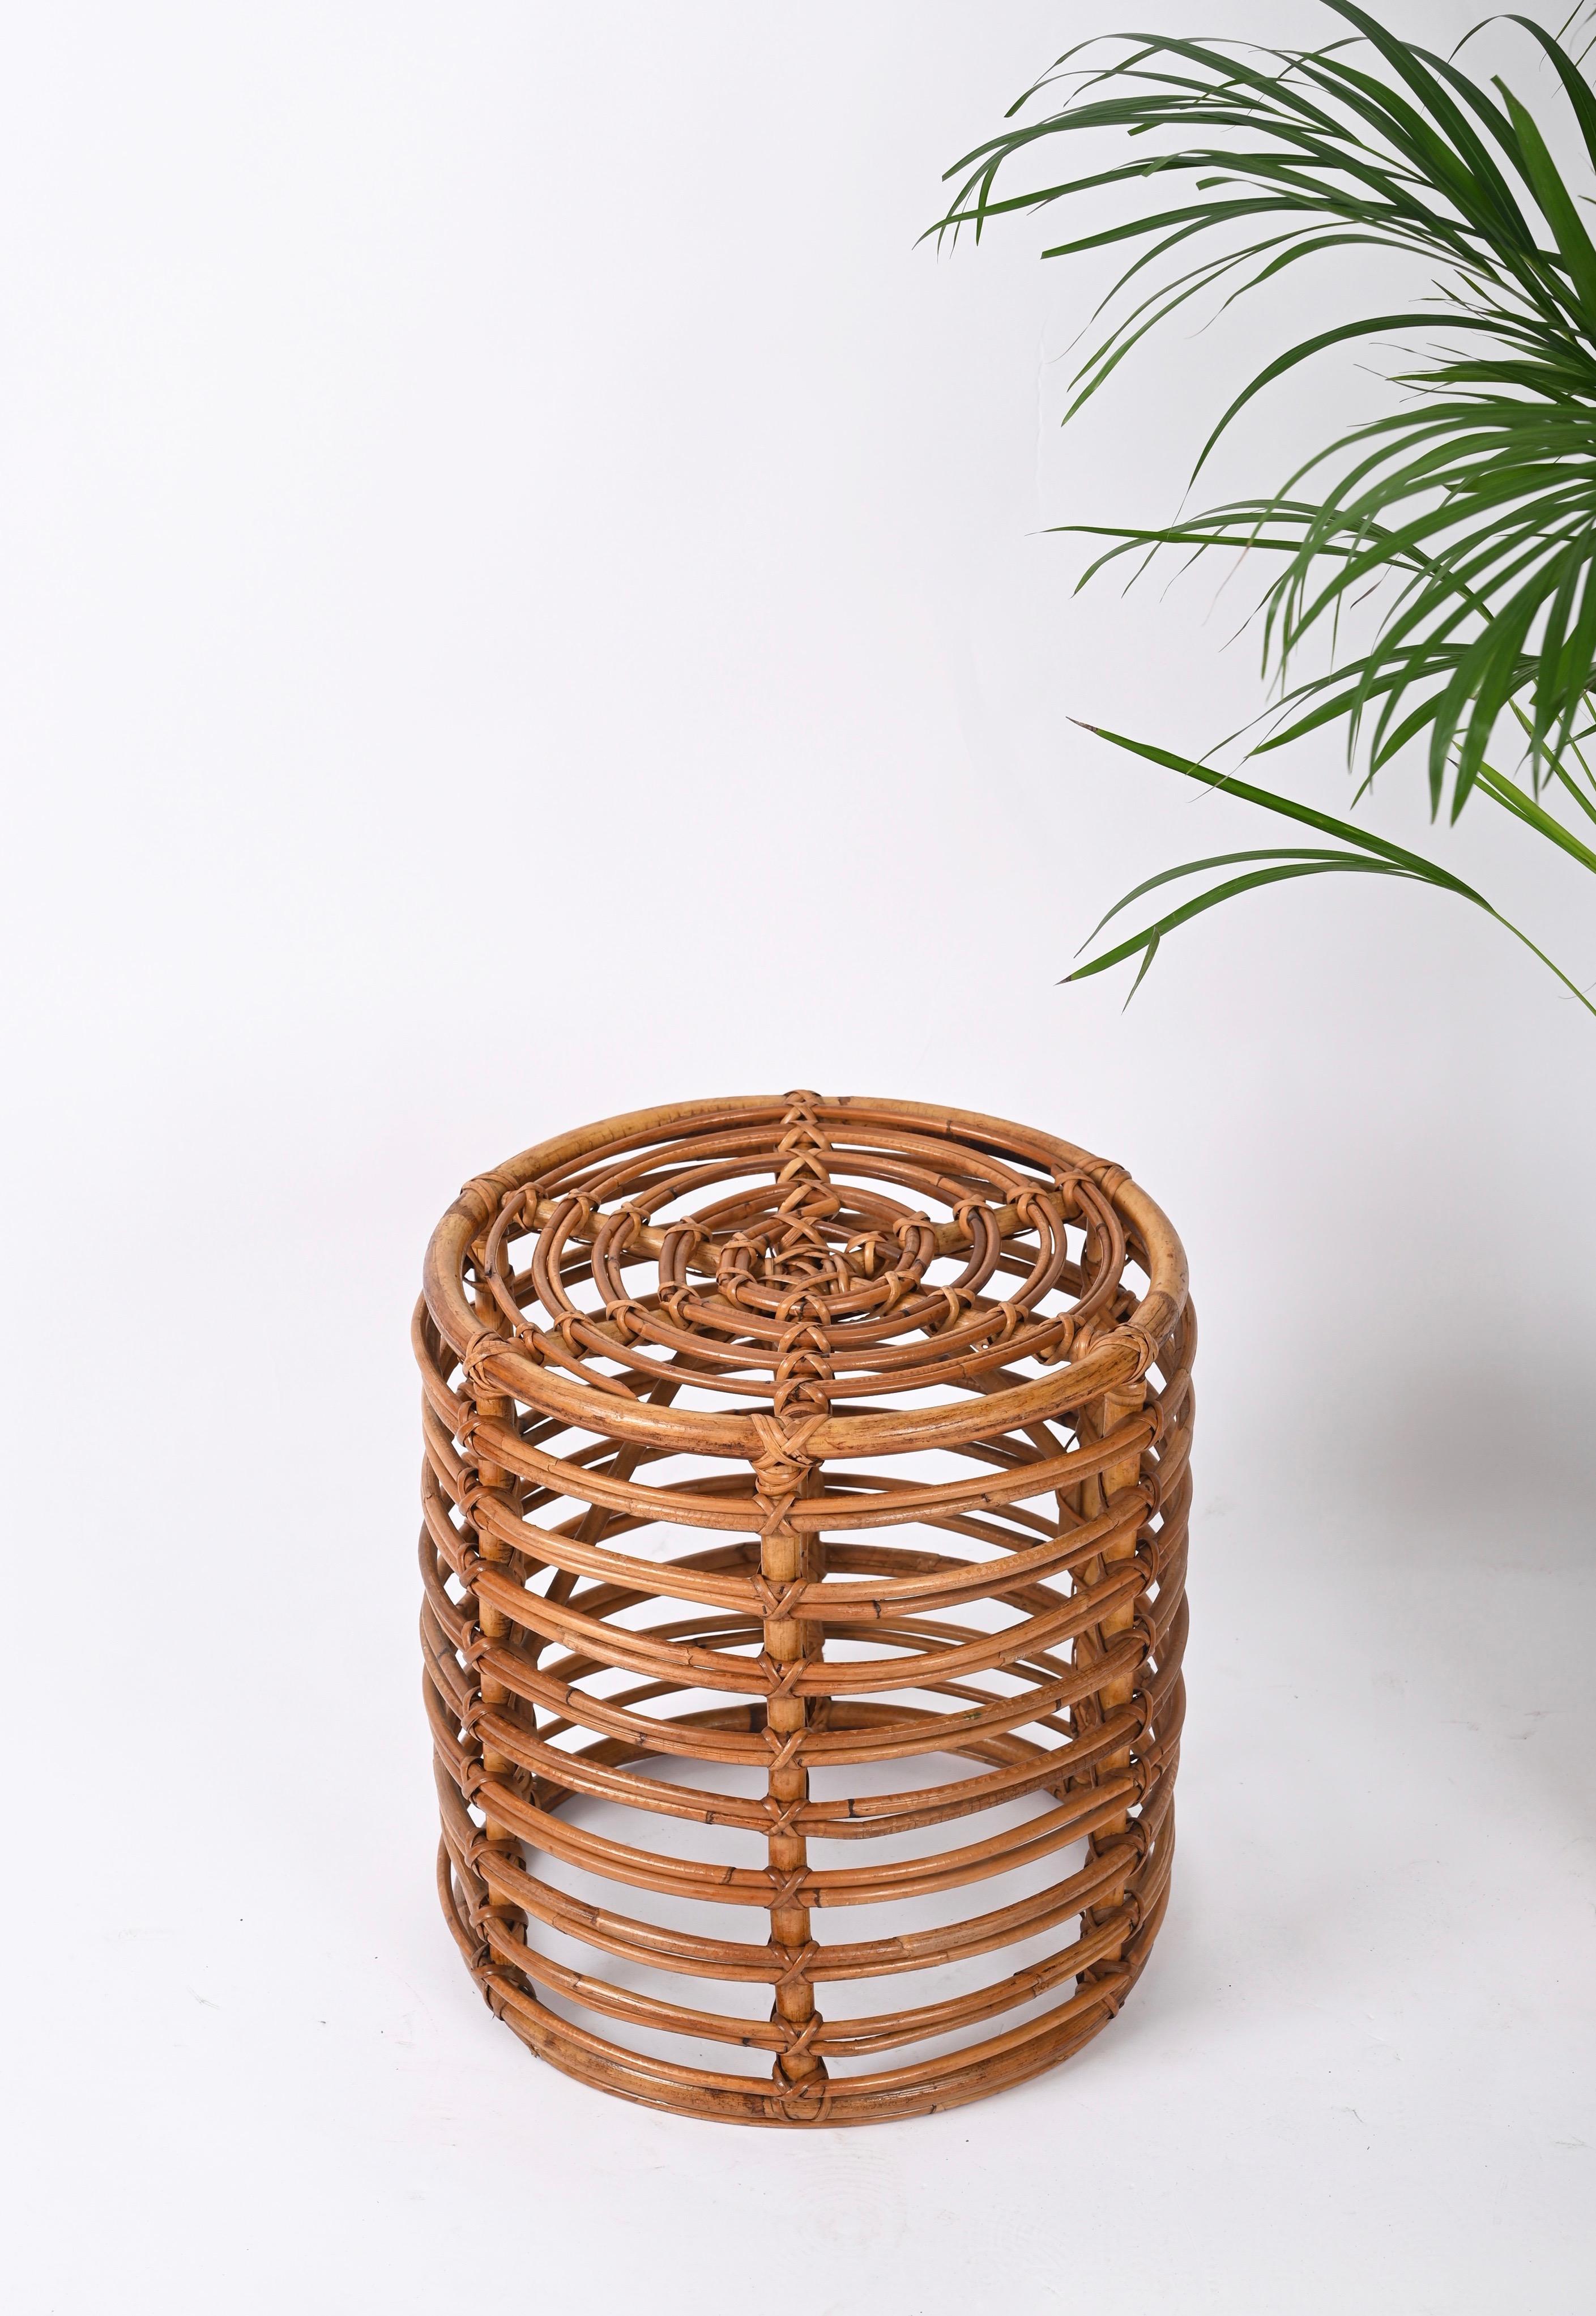 Beautiful pair of Tito Agnoli stools in rattan and bamboo. These fantastic and rare poufs were made in Italy during the 1960s.

The craftsmanship of these stools is exceptional and the curved bamboo structure allows each to be light and solid at the